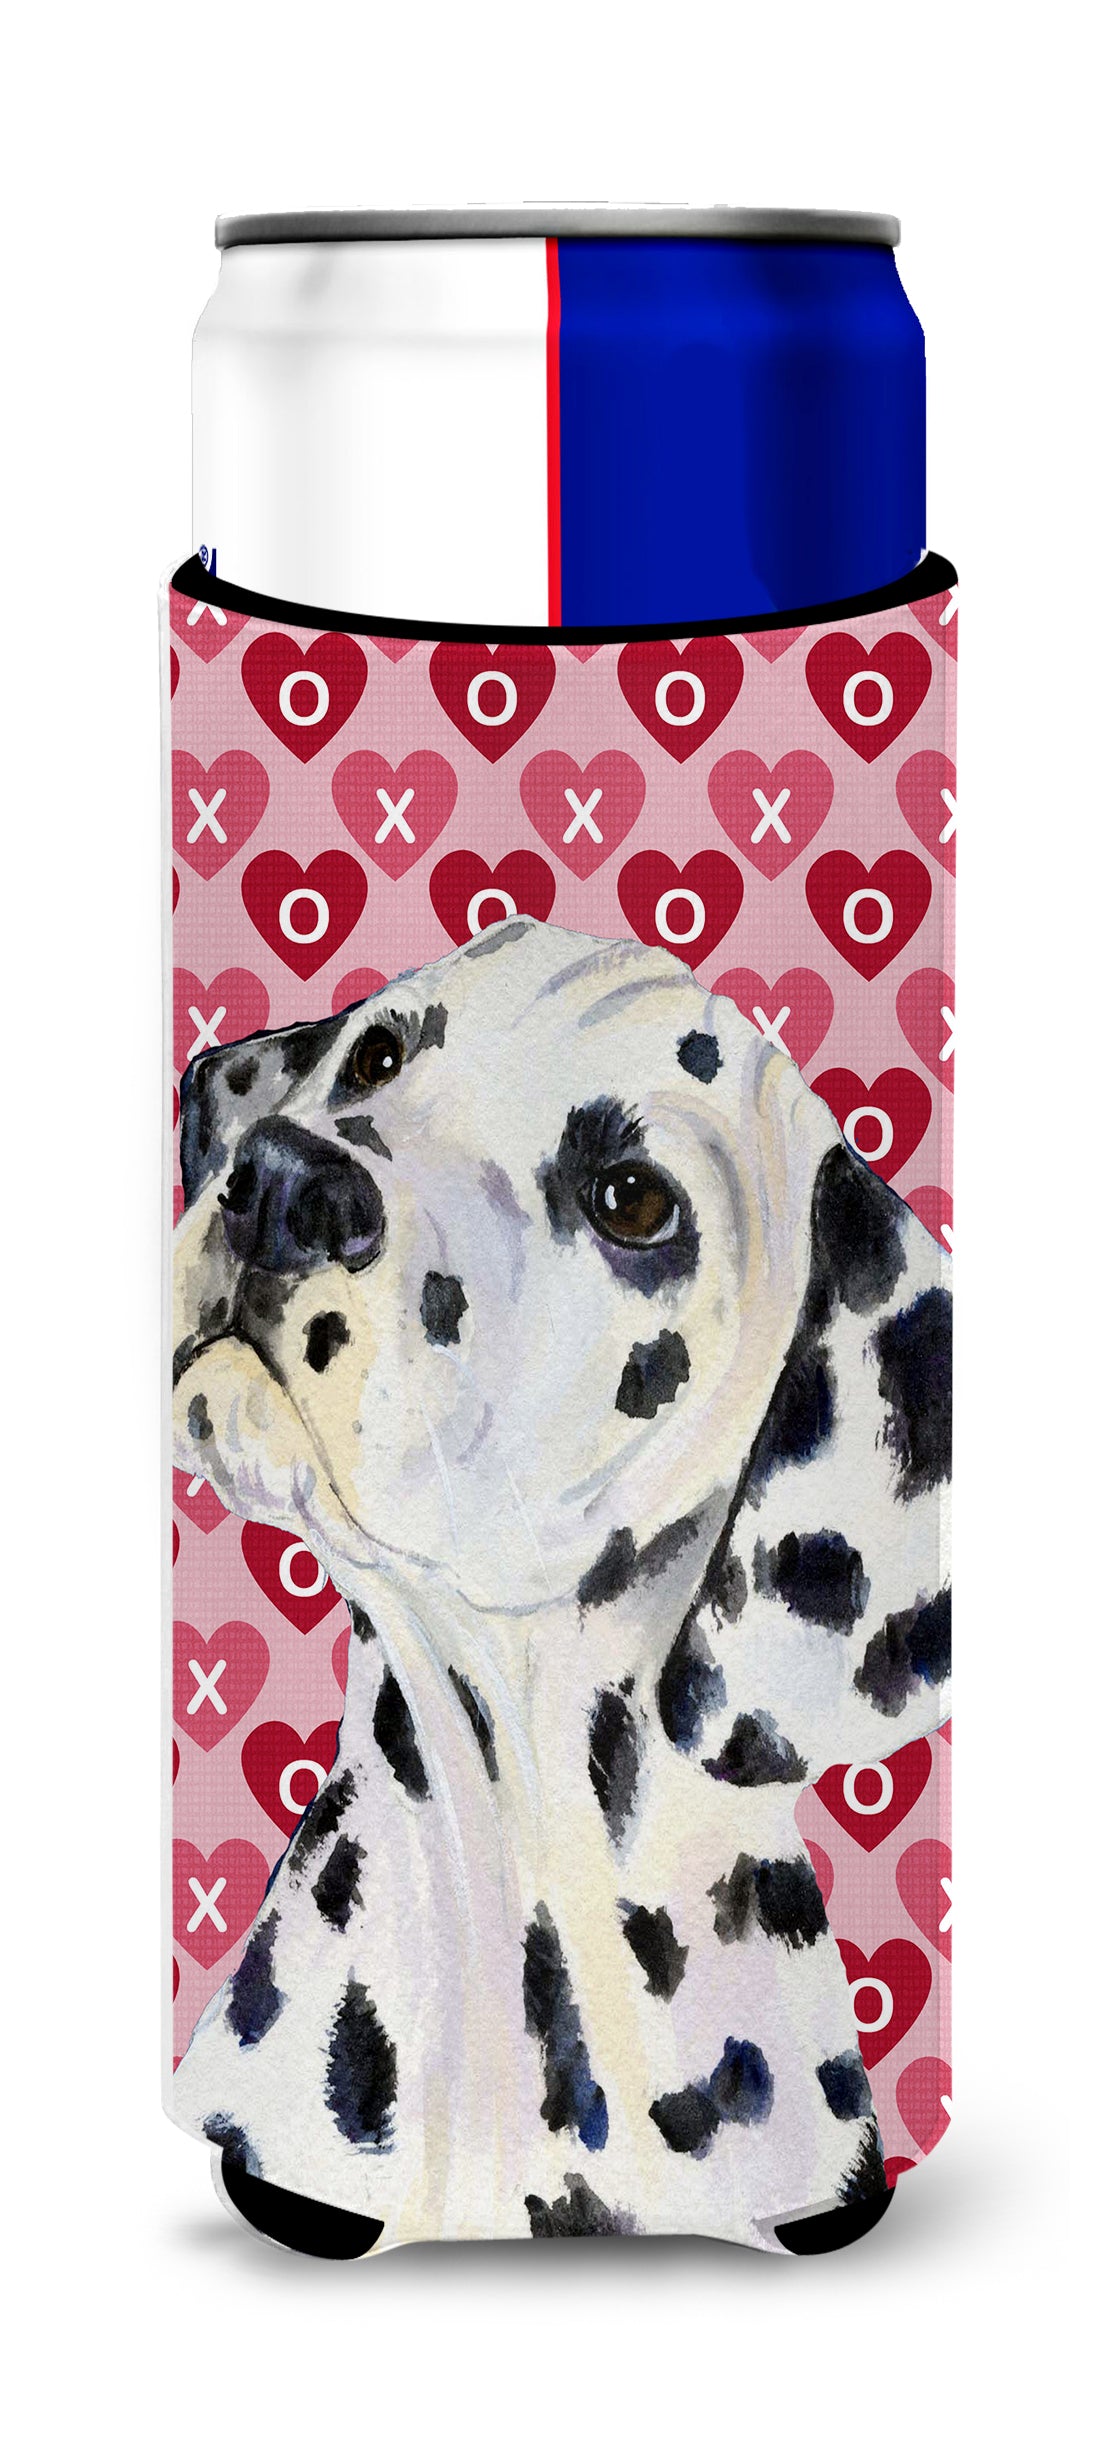 Dalmatian Hearts Love and Valentine's Day Portrait Ultra Beverage Insulators for slim cans SS4492MUK.